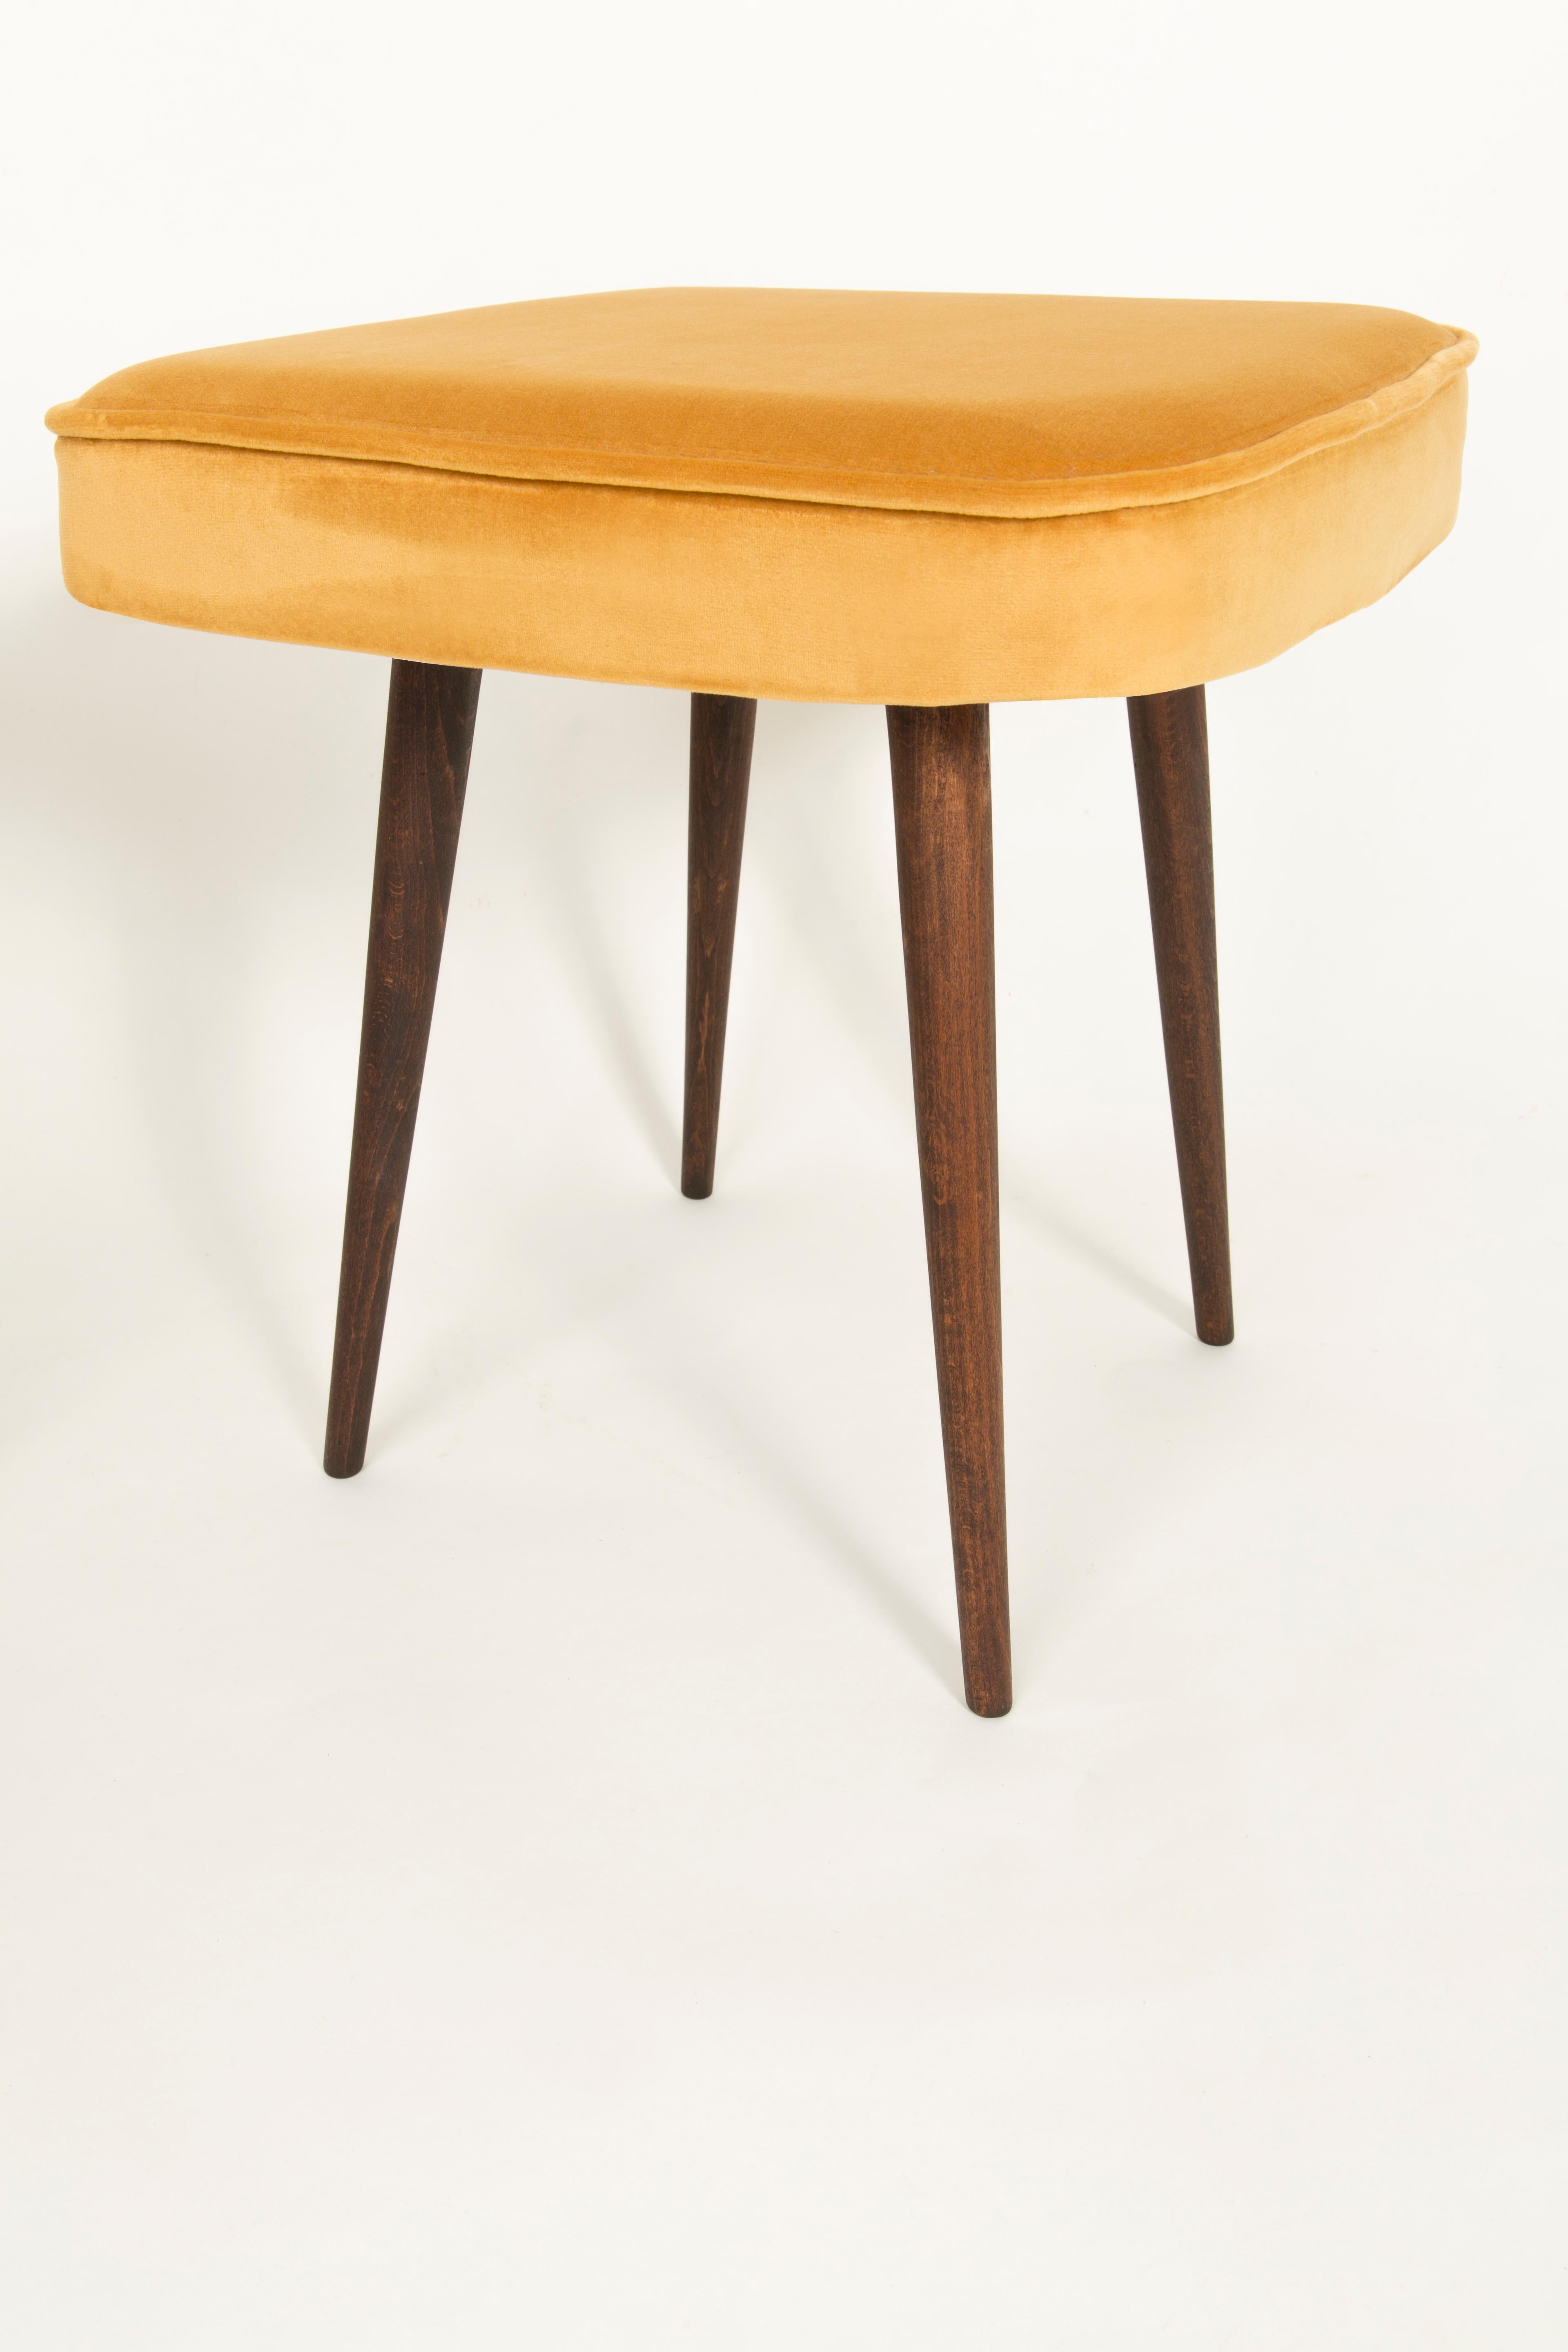 Hand-Crafted Pair of Mustard Yellow Stools, 1960s For Sale